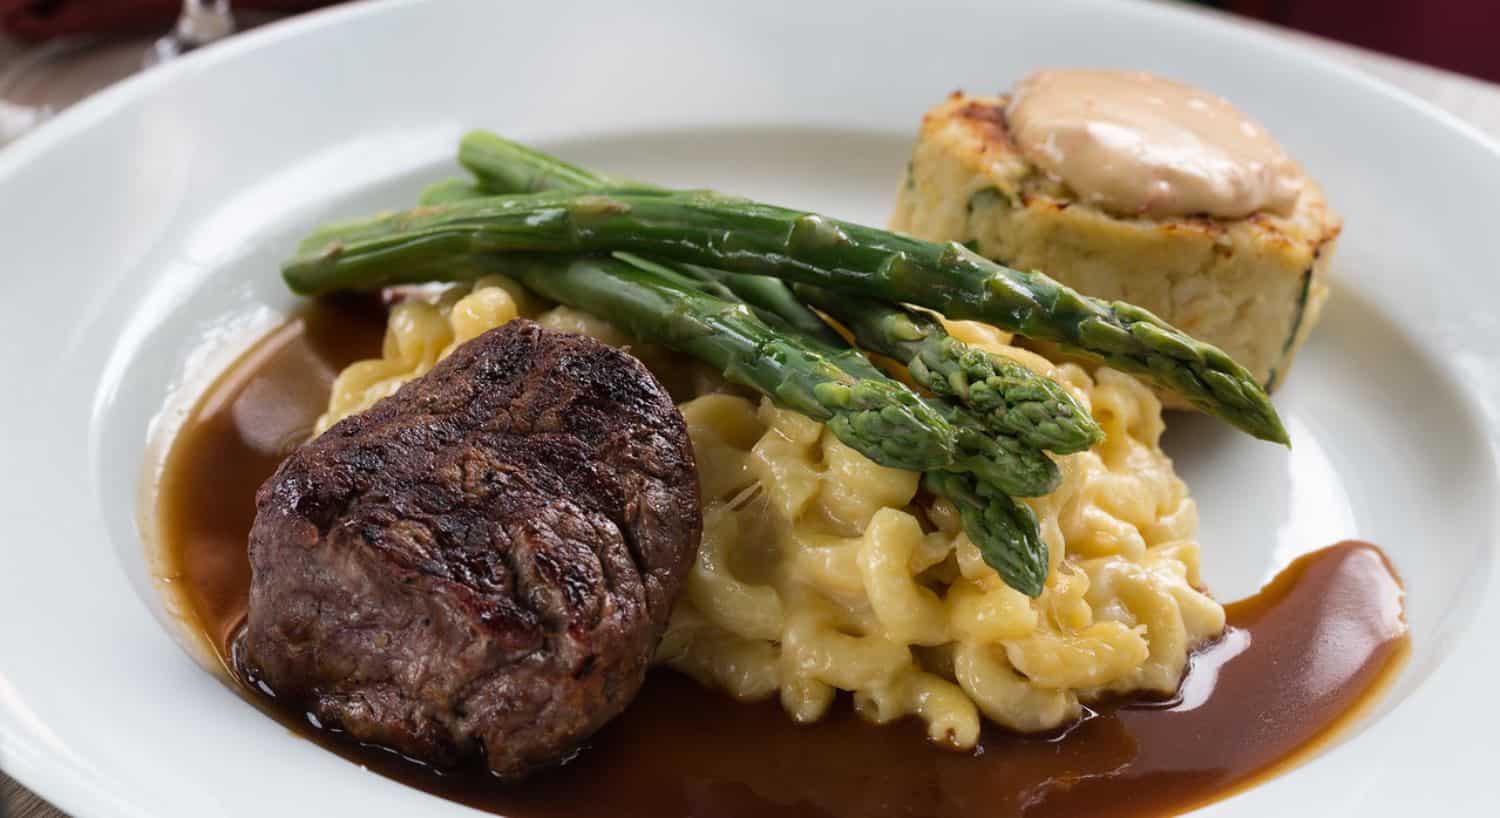 Close up view of a juicy steak, creamy macaroni and cheese, asparagus, and crab cake on white porcelain plate